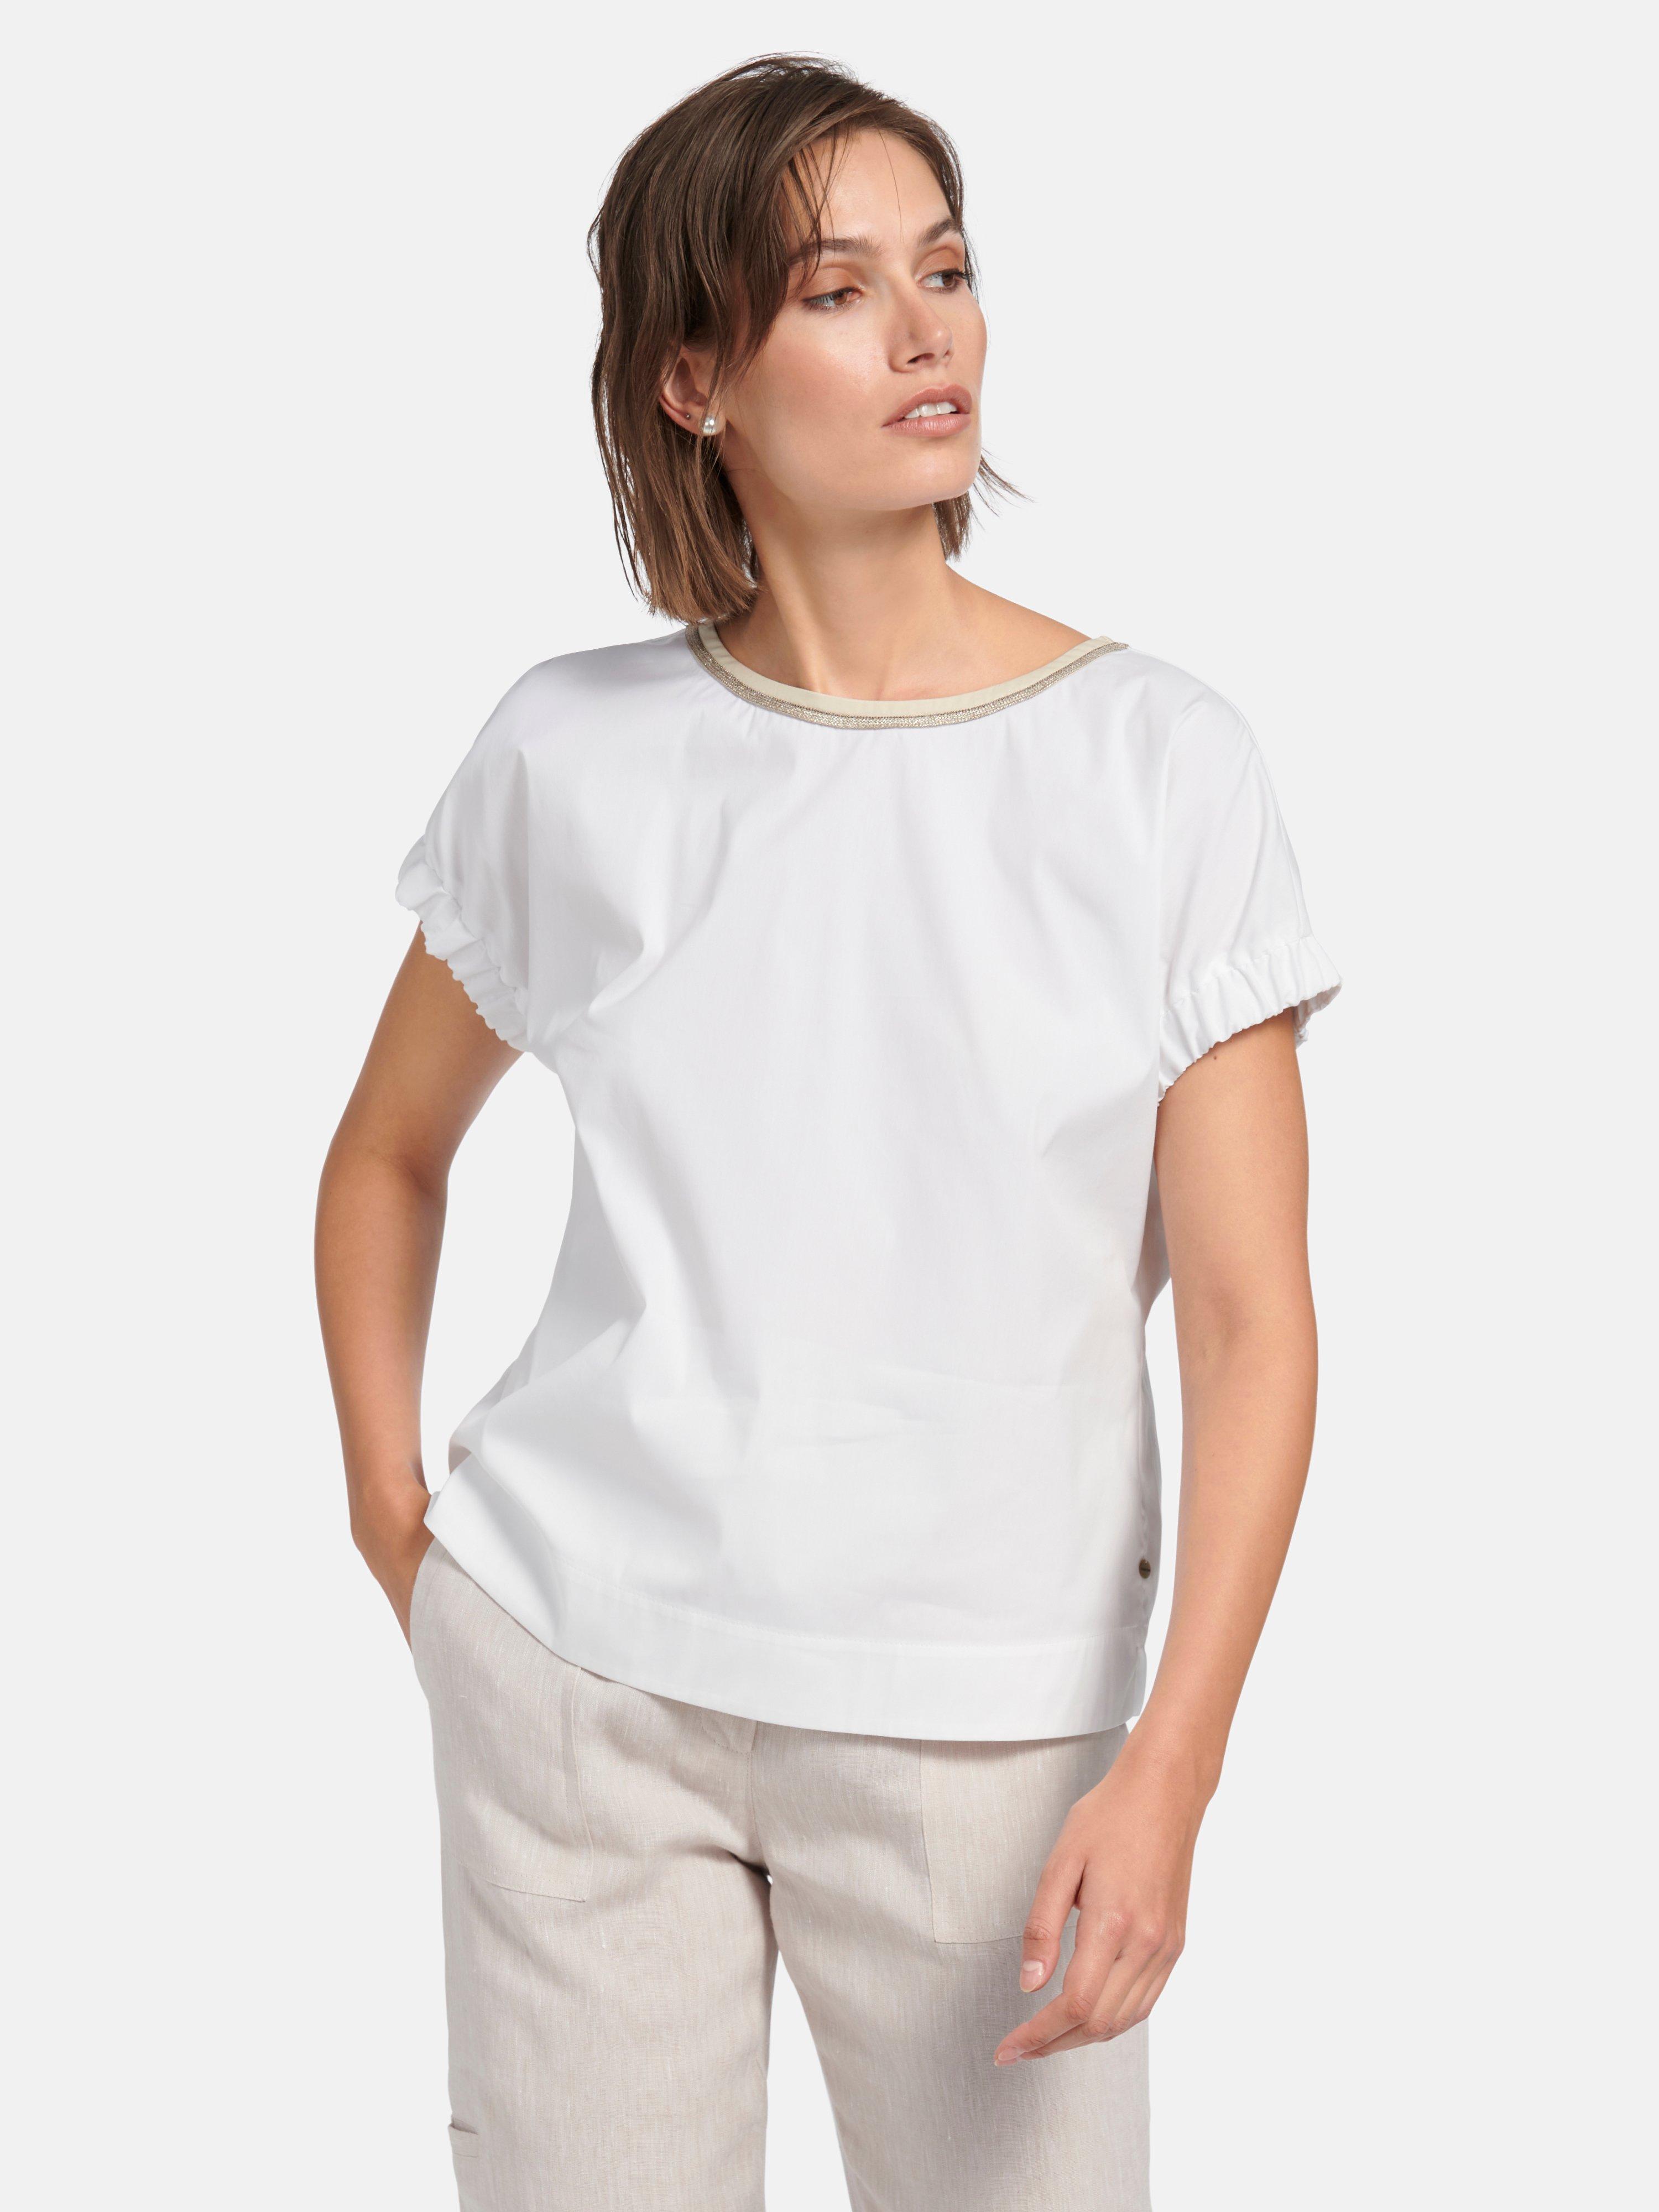 Louis and Mia - Top with drop shoulder - white/beige